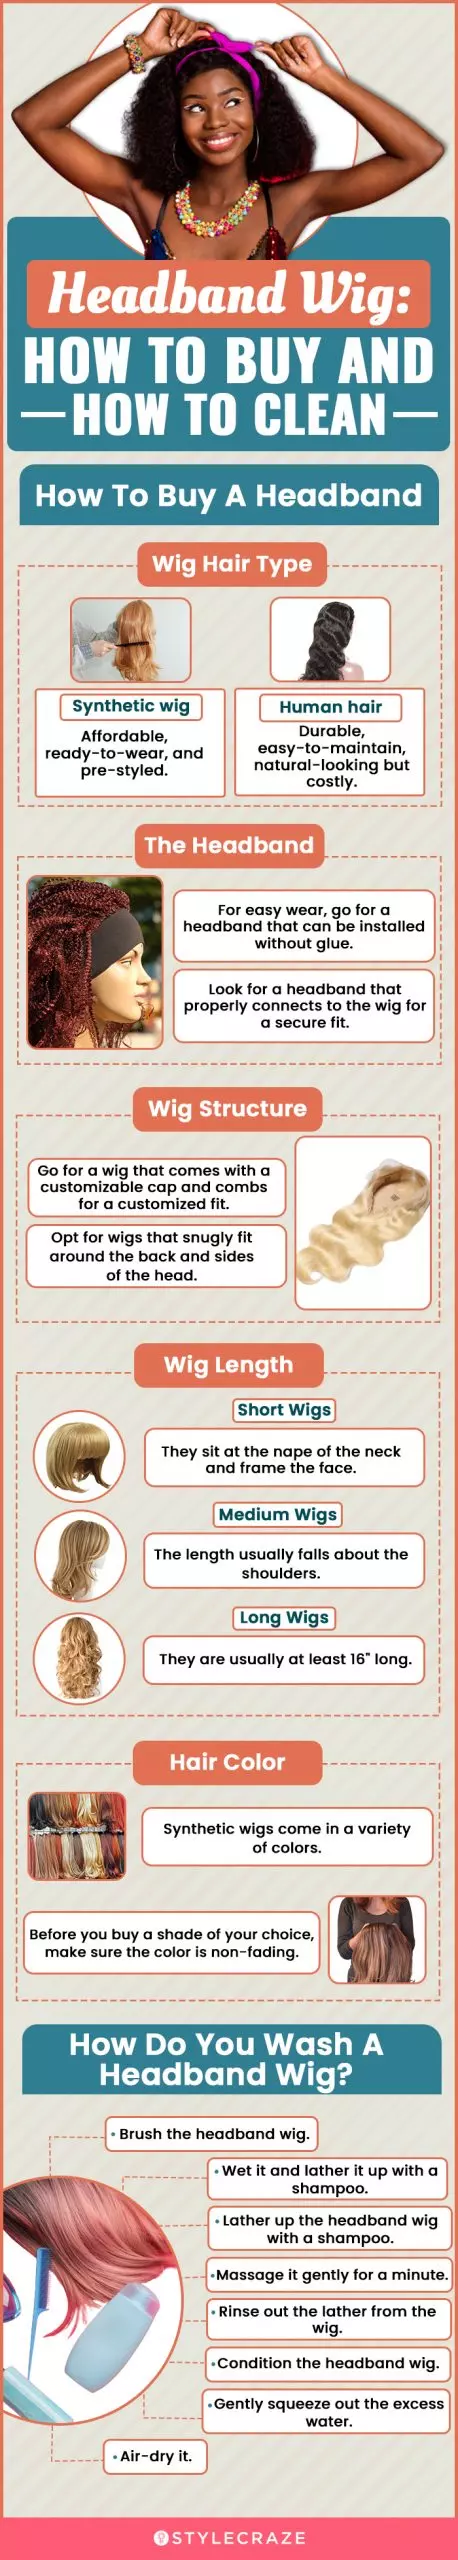 Headband Wig: How To Buy And How To Clean (infographic)